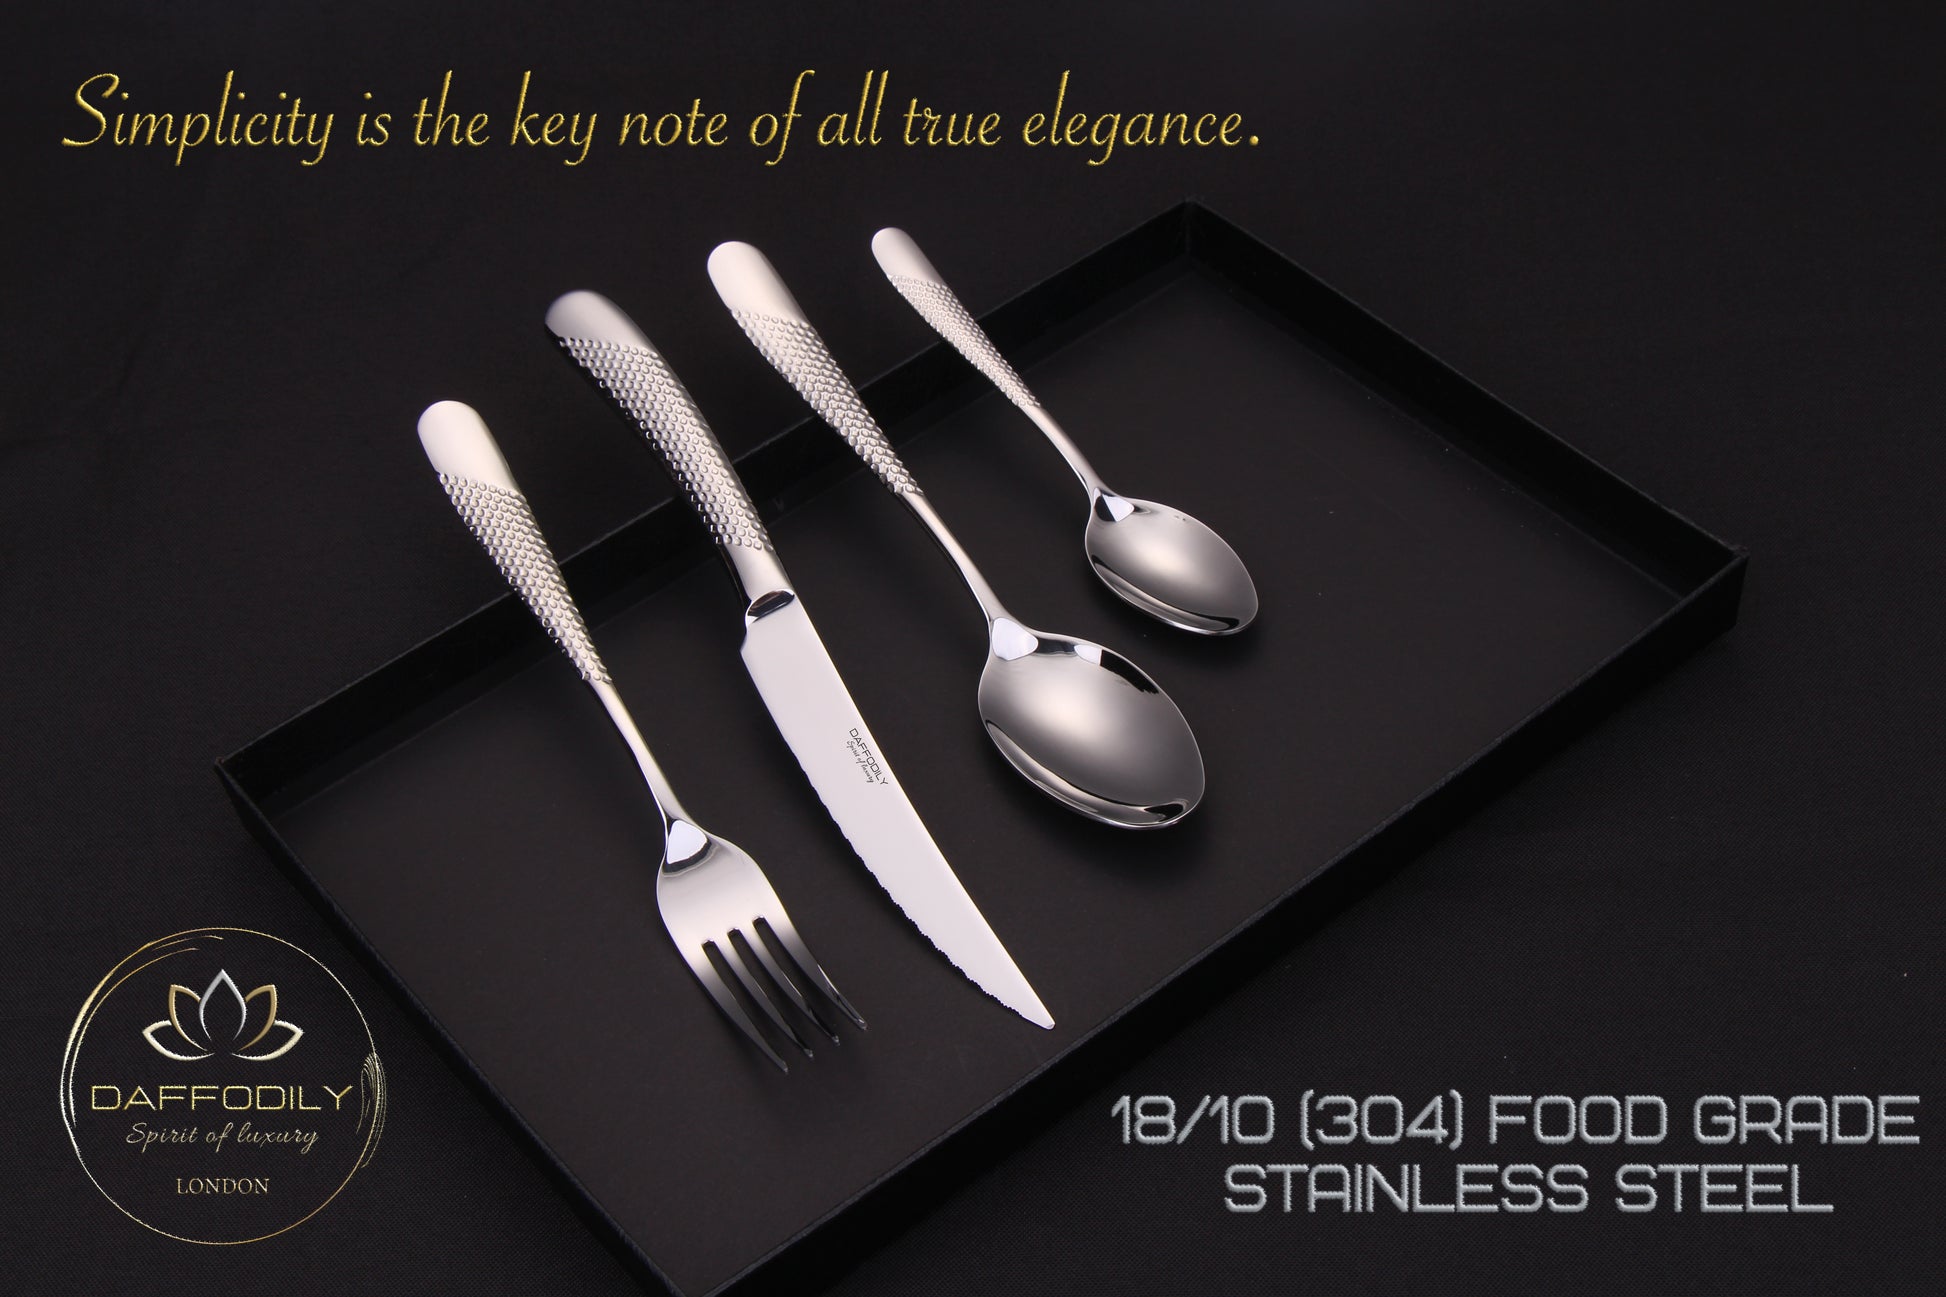 Modern stainless steel flatware for everyday use